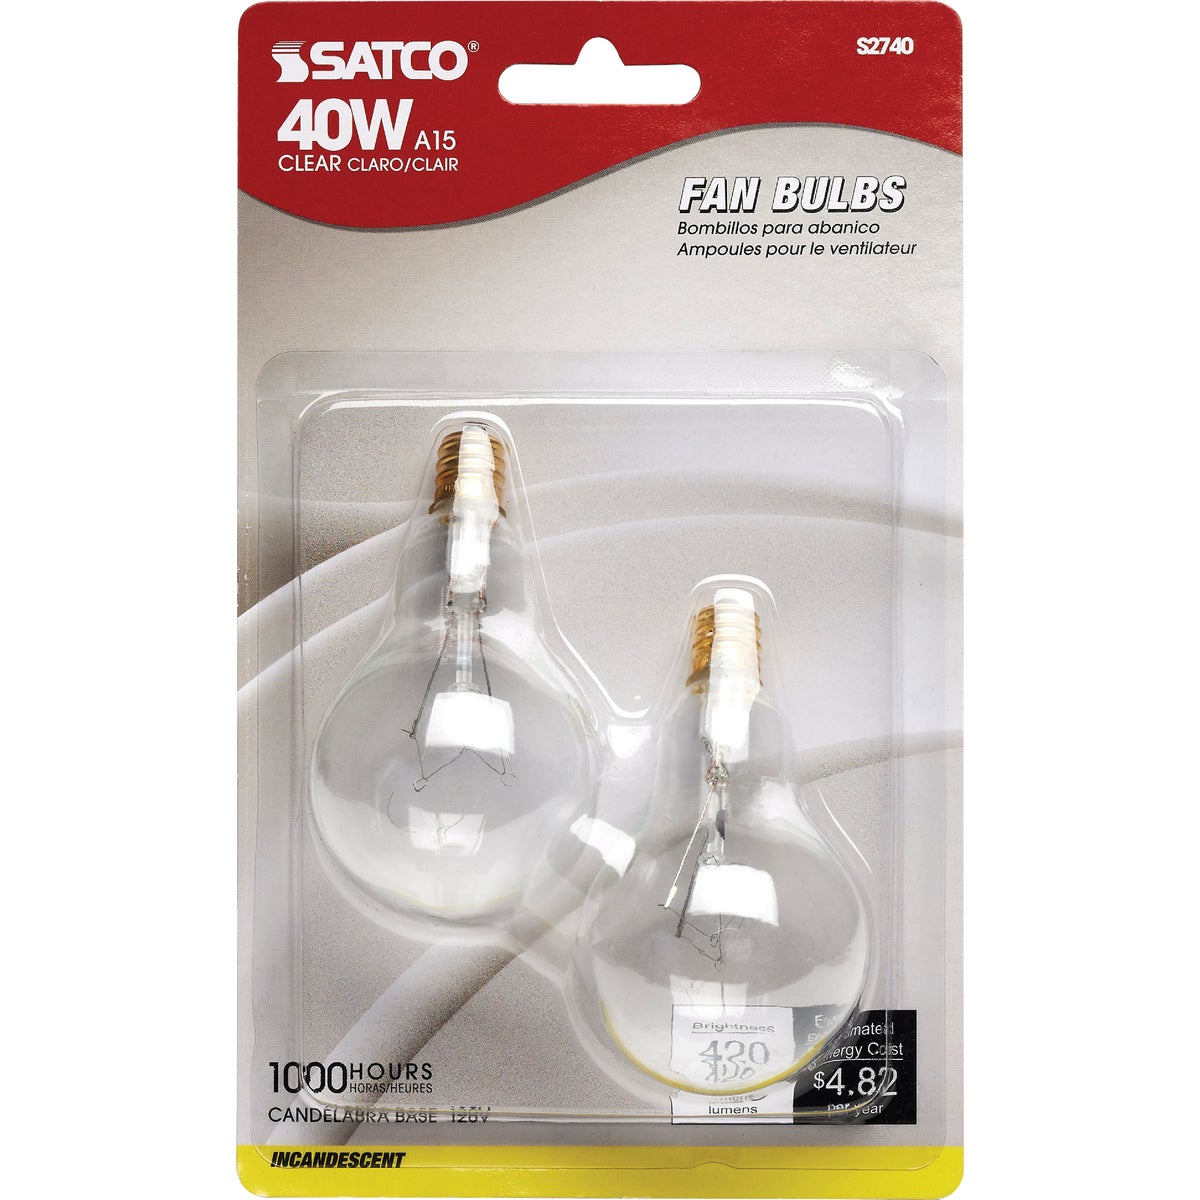 Satco 40W Clear Candelabra A15 Incandescent Ceiling Fan Light Bulb (2-Pack)